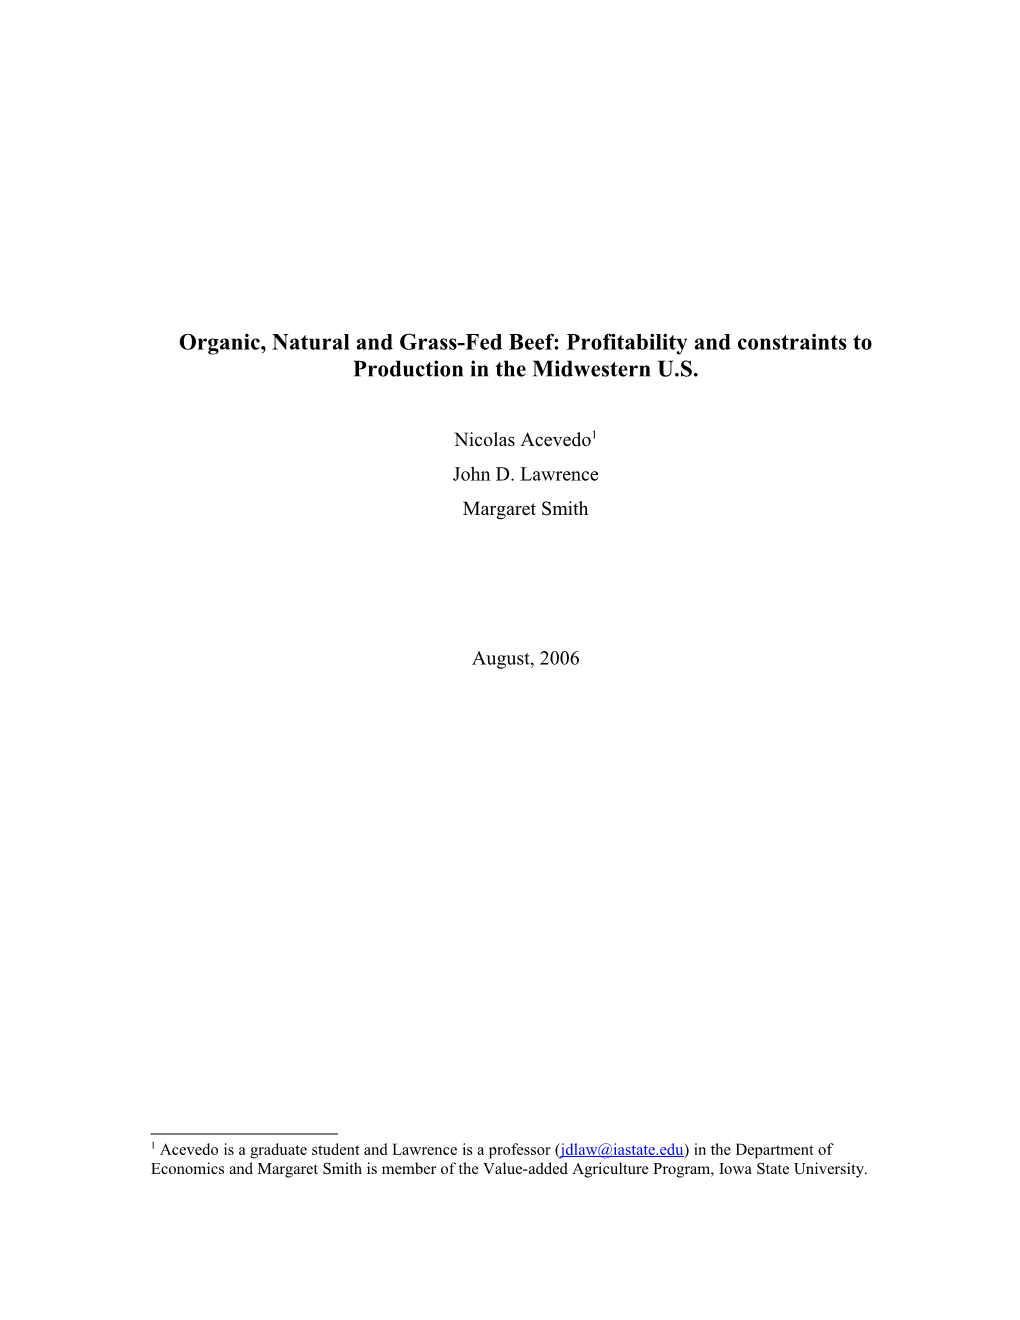 Organic, Natural and Grass-Fed Beef: Profitability and Constraints to Production in The